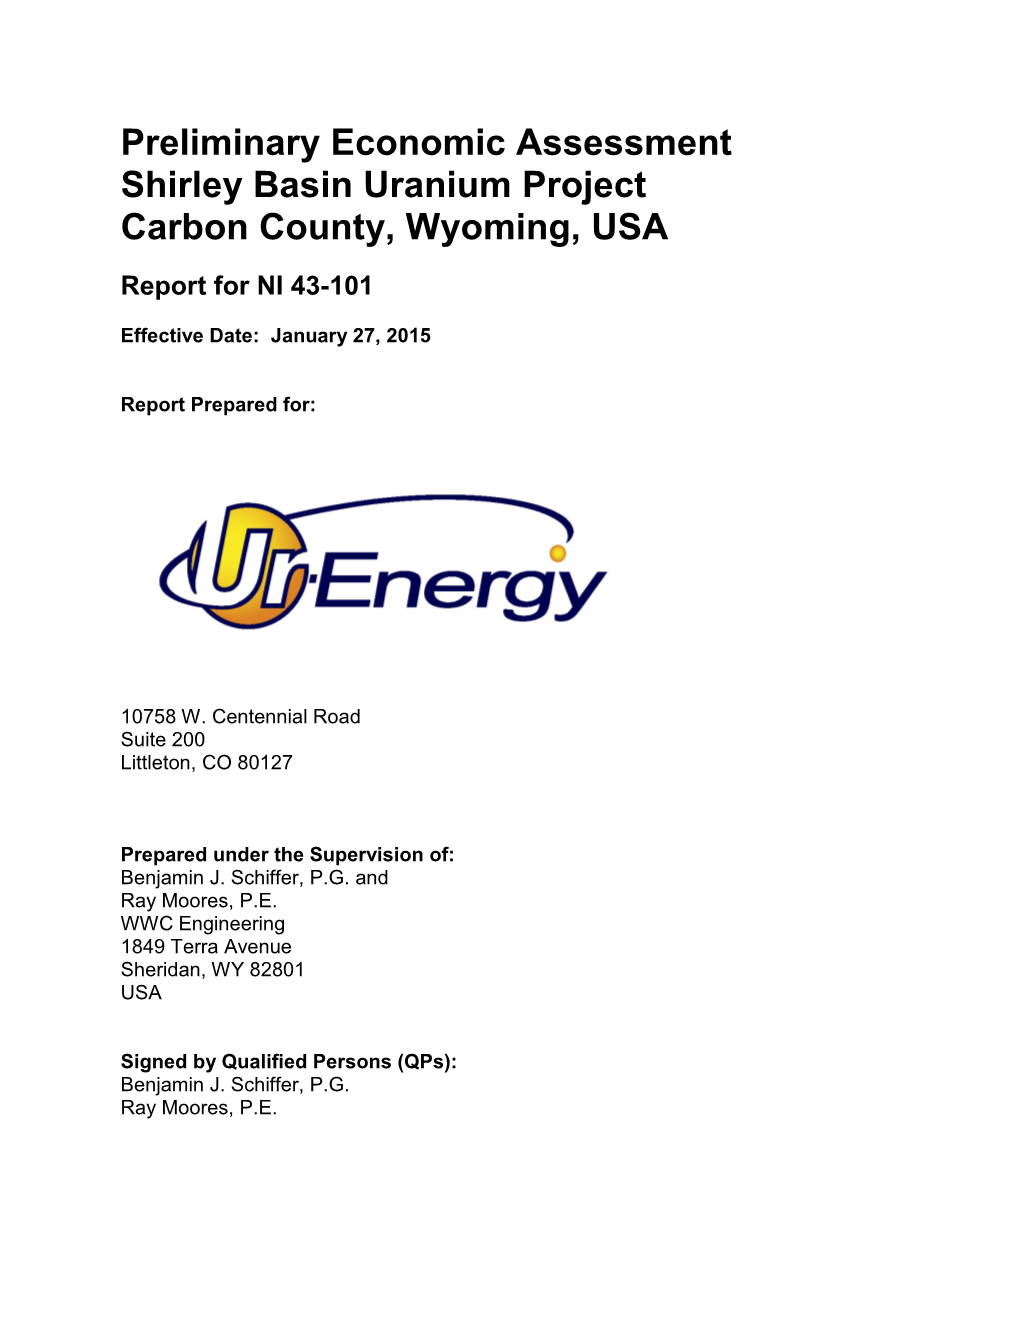 NI-43-101 Preliminary Economic Assessment Shirley Basin Uranium Project Carbon County, Wyoming